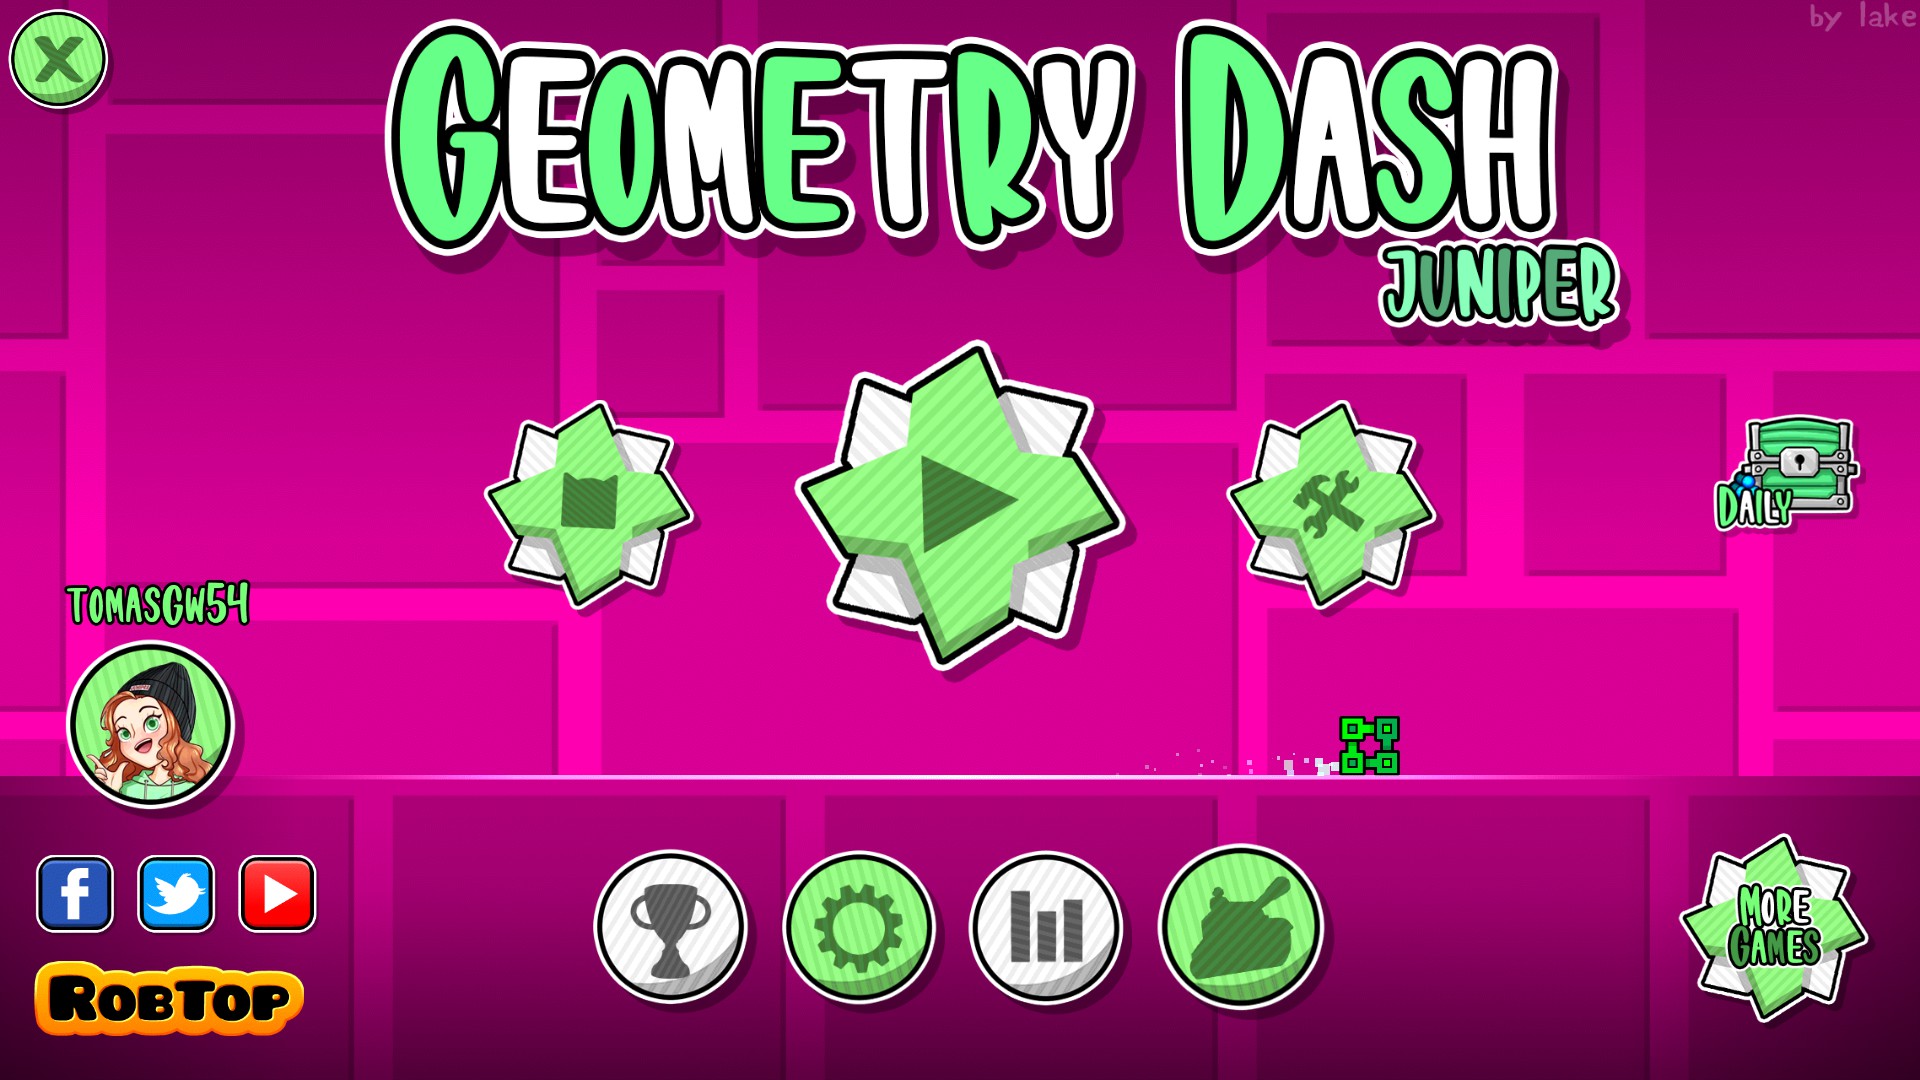 How to IMPROVE at Geometry Dash image 39